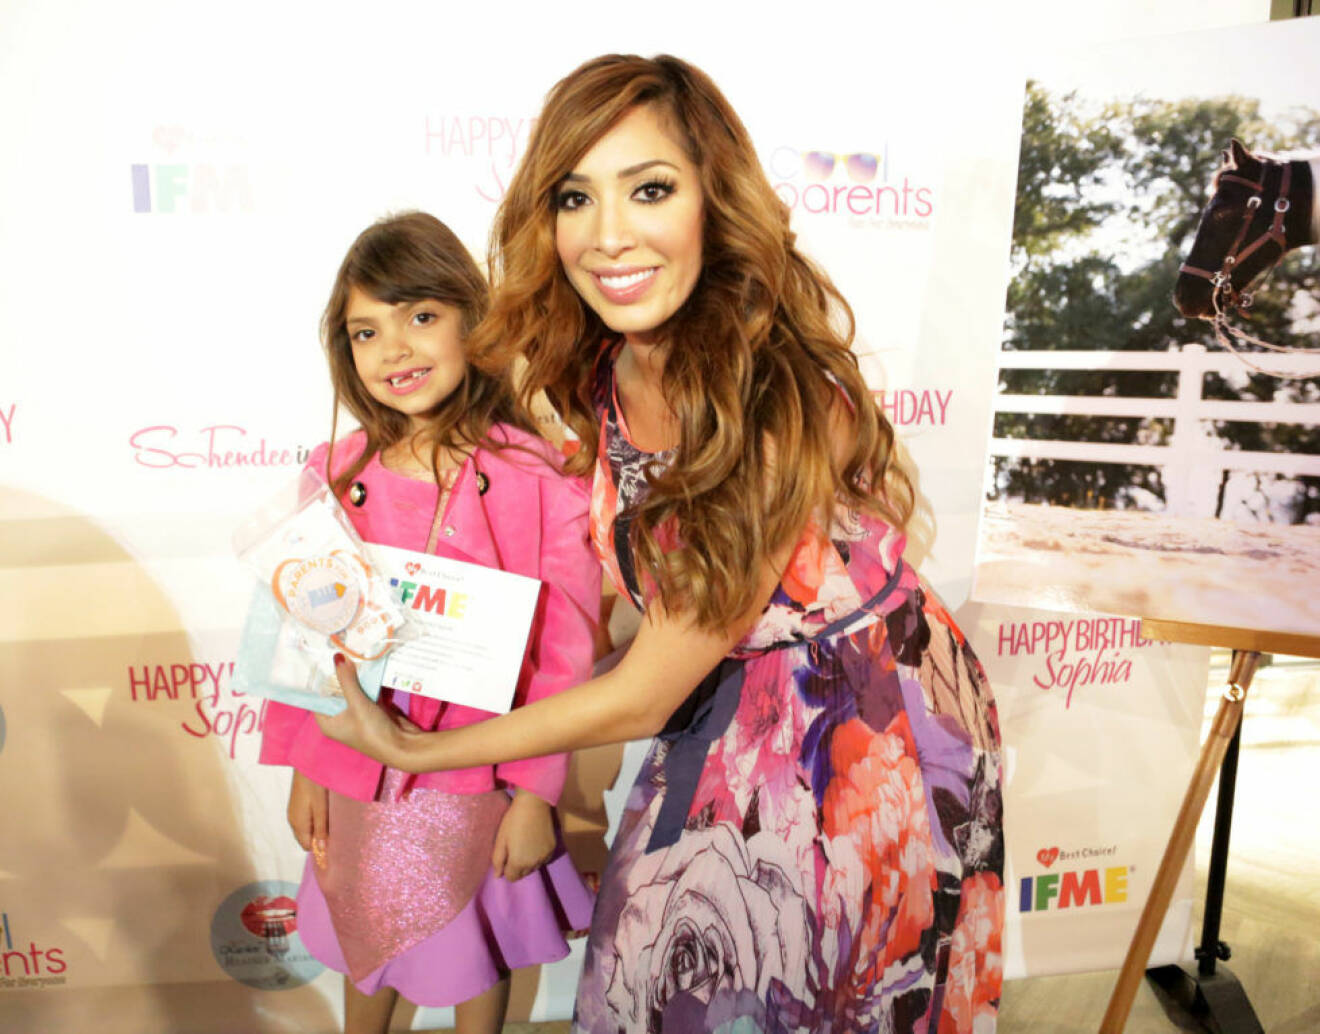 EXCLUSIVE: Farrah Abraham's daughter Sophia has a blasting 7th birthday party!